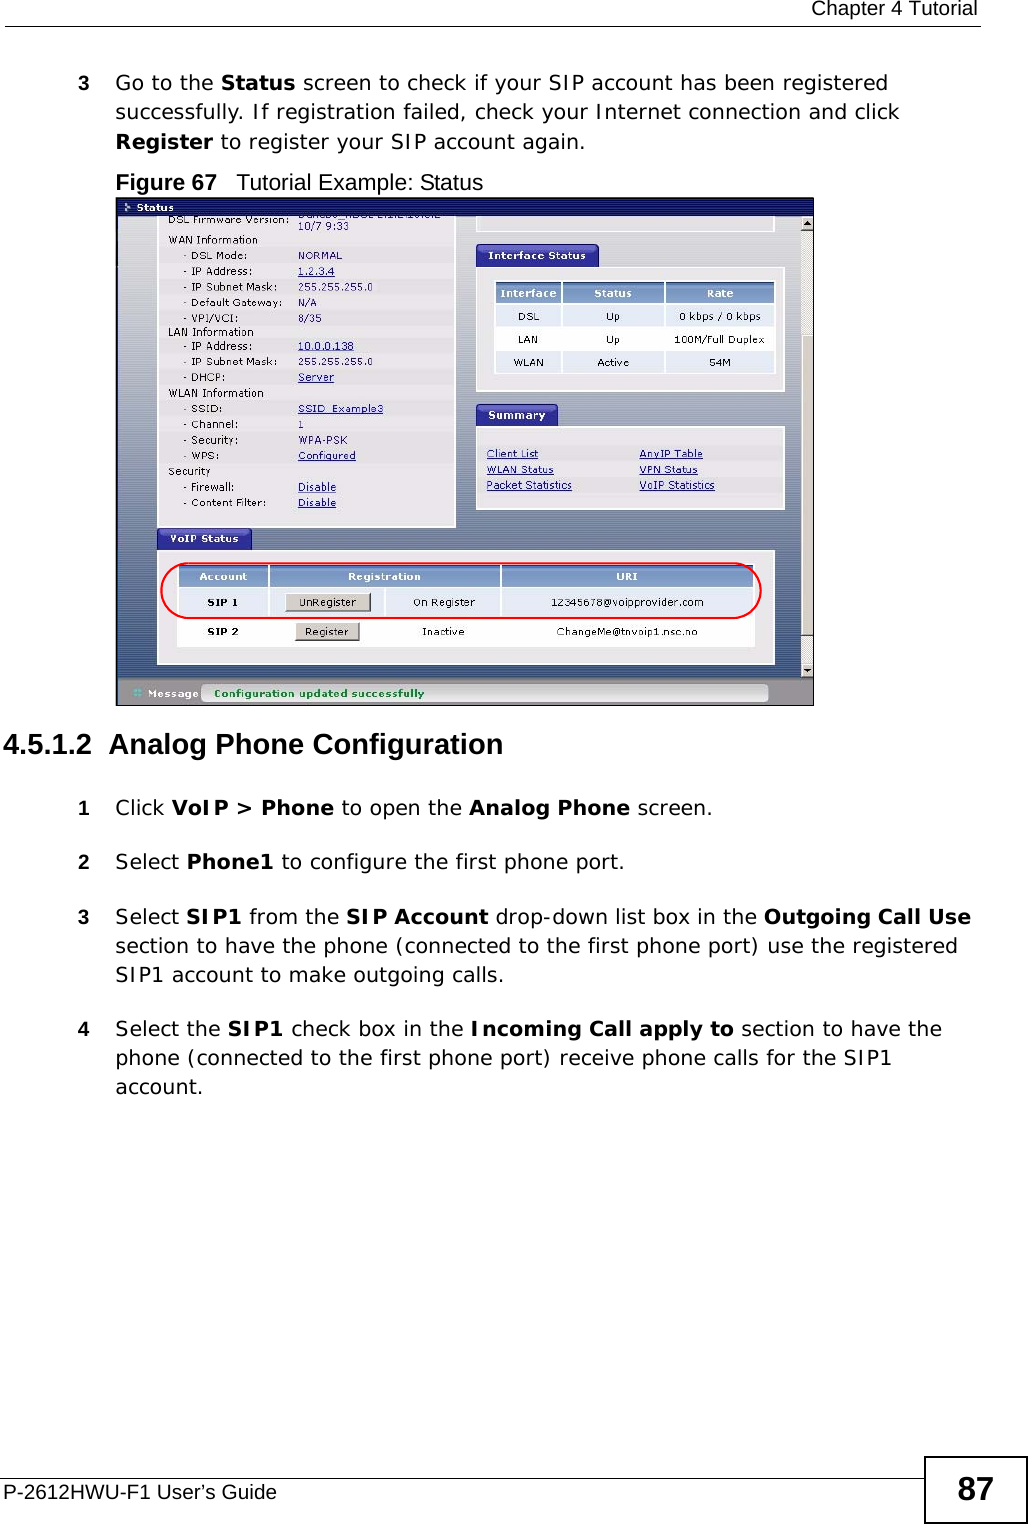  Chapter 4 TutorialP-2612HWU-F1 User’s Guide 873Go to the Status screen to check if your SIP account has been registered successfully. If registration failed, check your Internet connection and click Register to register your SIP account again.Figure 67   Tutorial Example: Status4.5.1.2  Analog Phone Configuration1Click VoIP &gt; Phone to open the Analog Phone screen.2Select Phone1 to configure the first phone port.3Select SIP1 from the SIP Account drop-down list box in the Outgoing Call Use section to have the phone (connected to the first phone port) use the registered SIP1 account to make outgoing calls.4Select the SIP1 check box in the Incoming Call apply to section to have the phone (connected to the first phone port) receive phone calls for the SIP1 account.